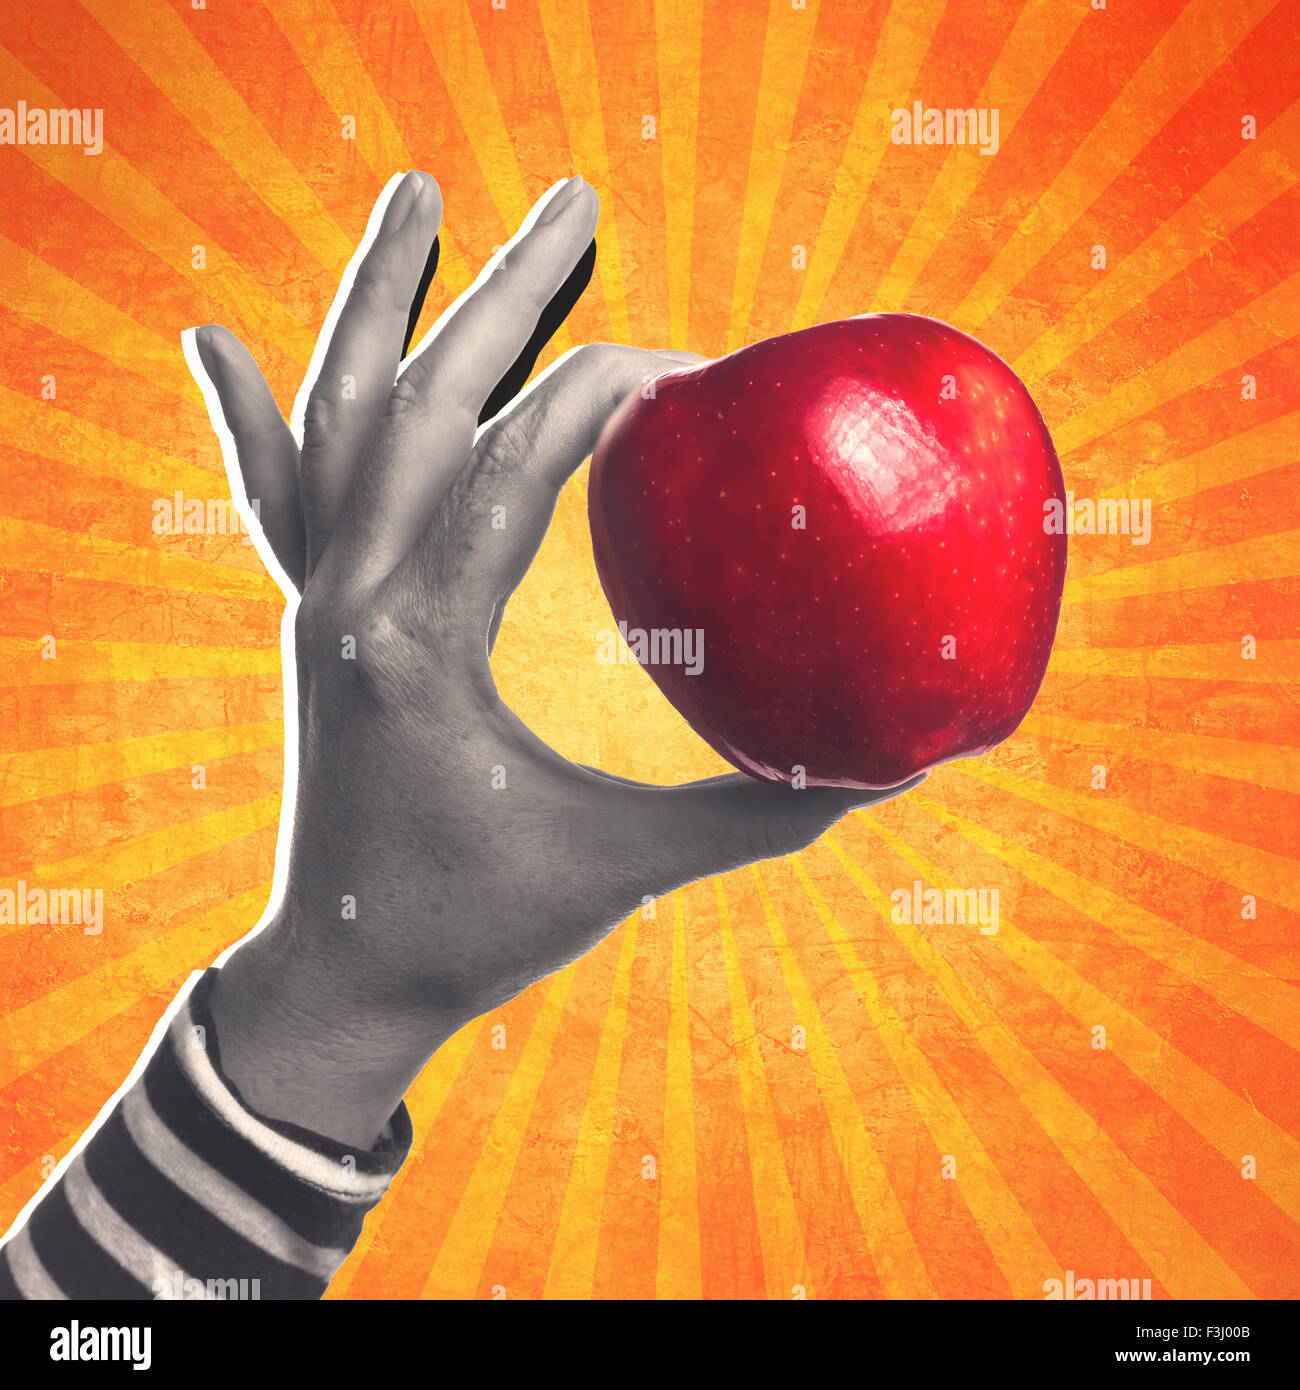 Healthy red delicious apple, retro collage image, woman holding tasty organic apple fruit. Stock Photo